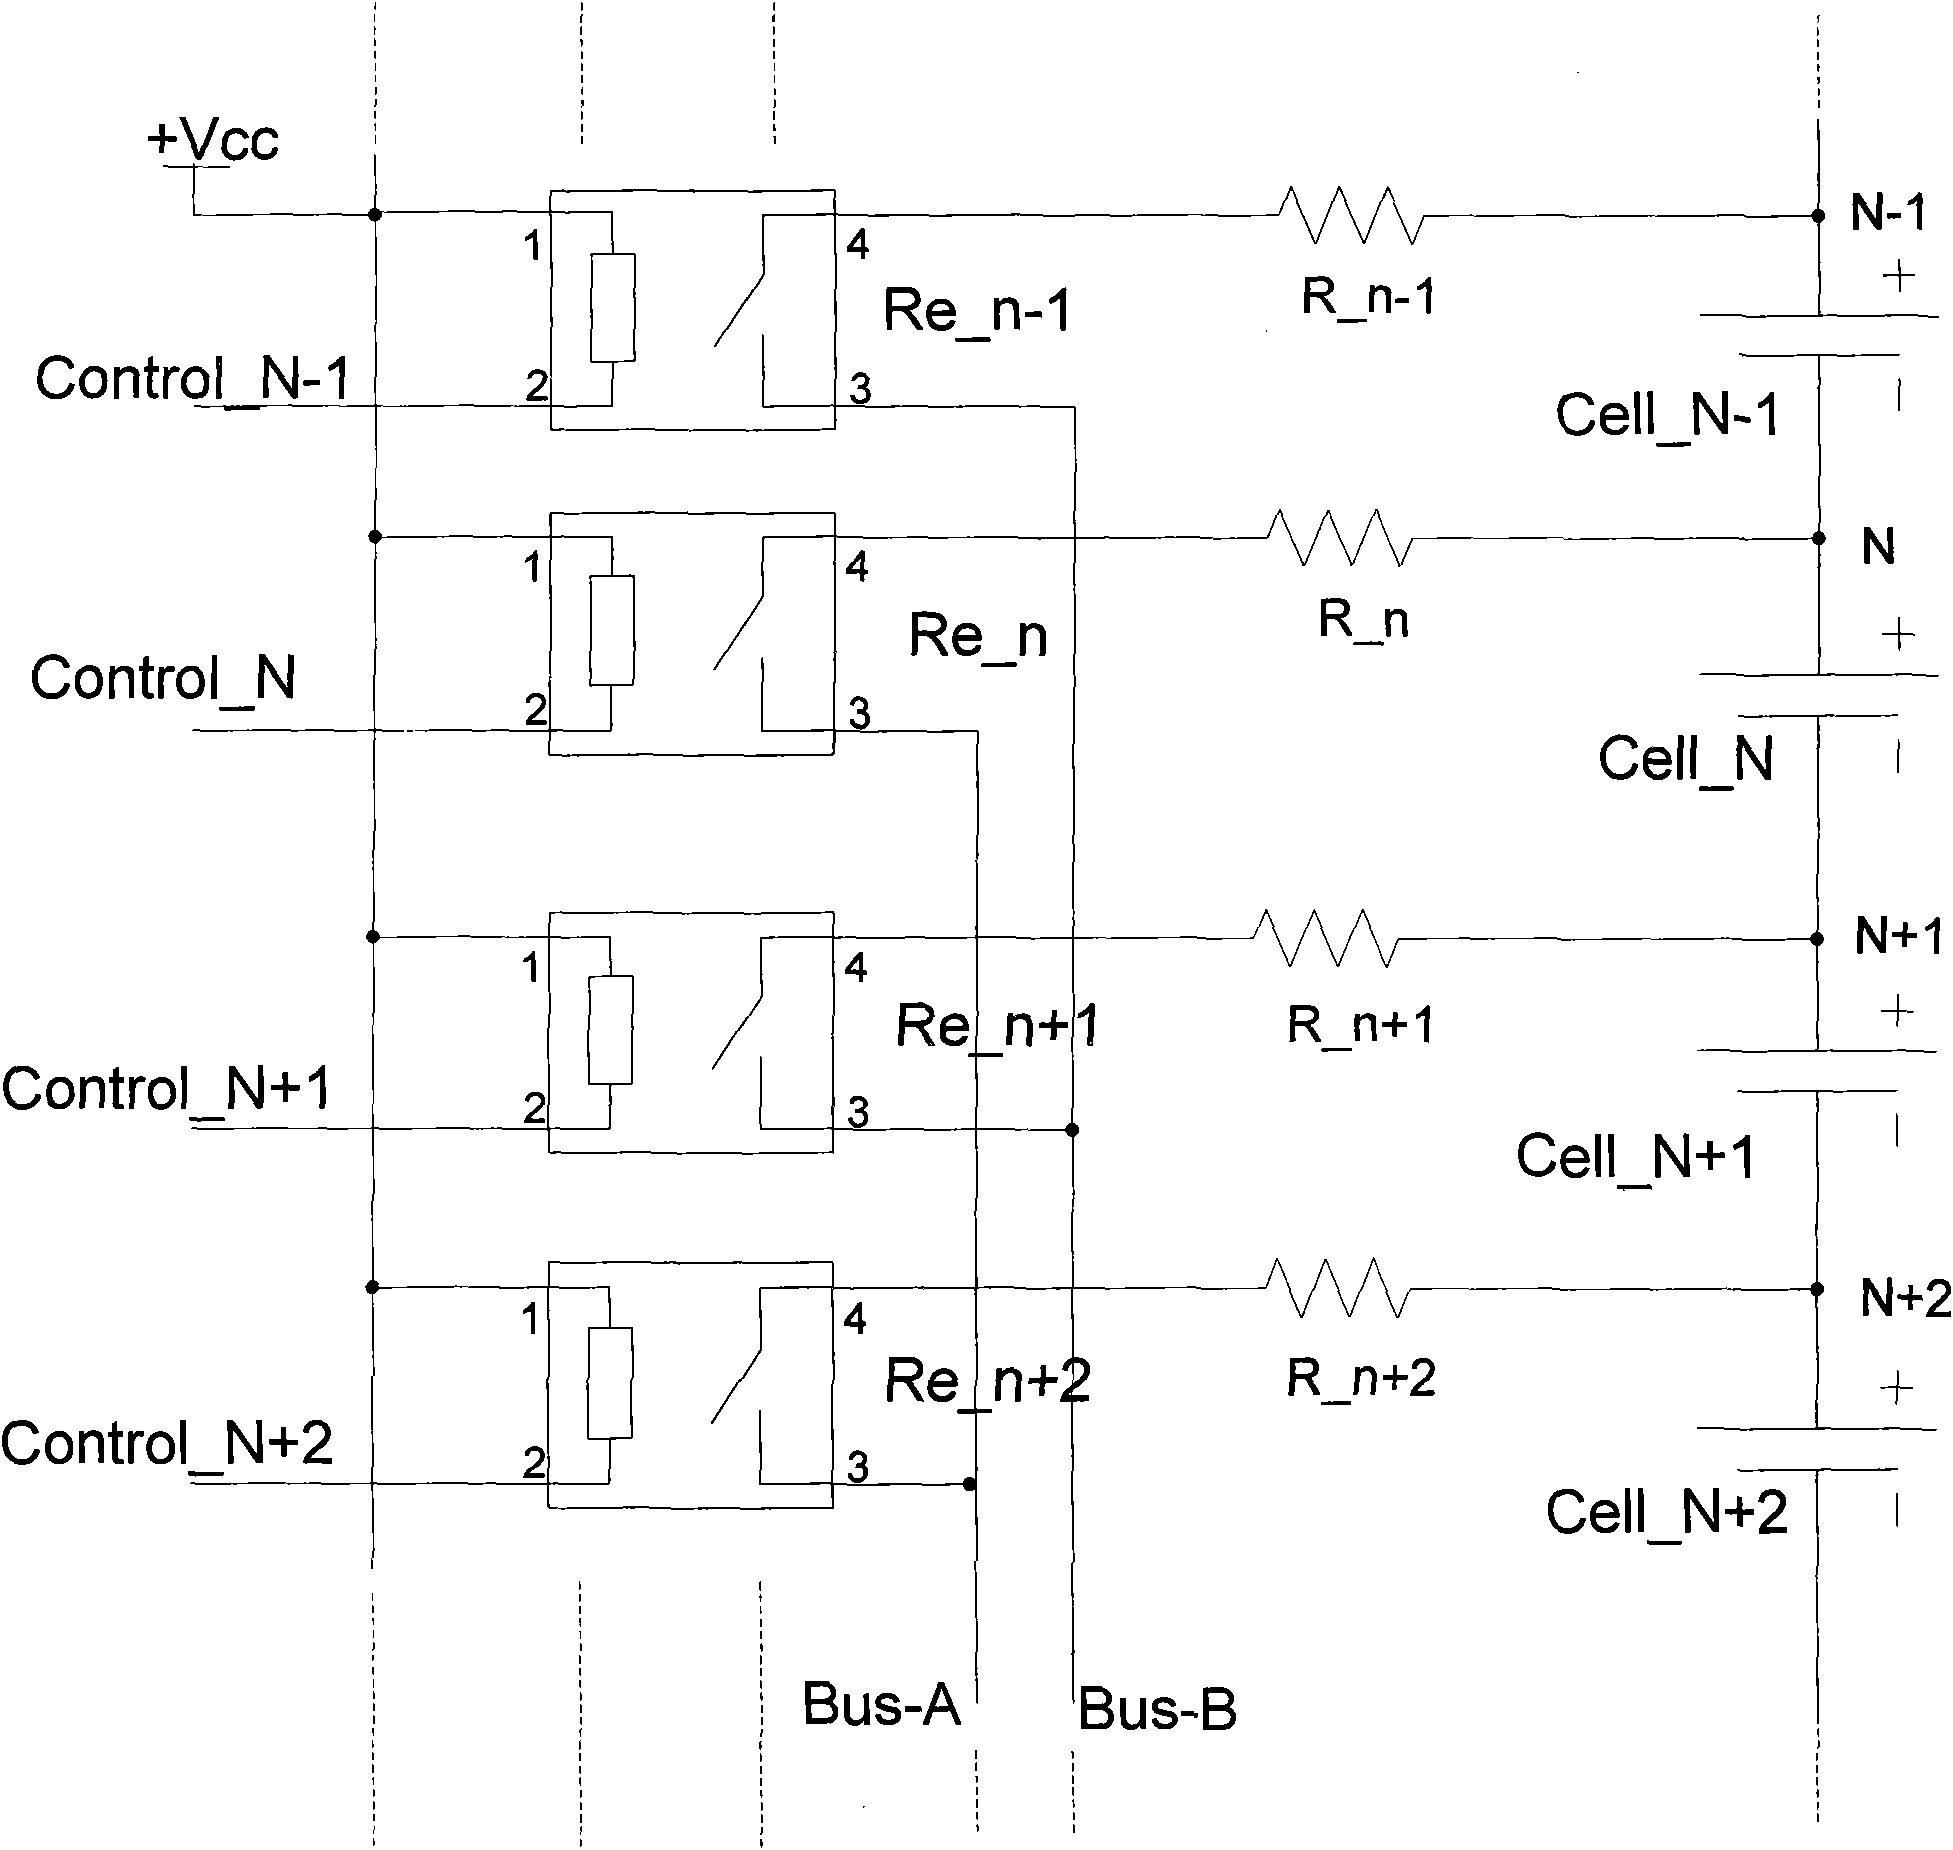 Voltage collecting circuit for monomer batteries of battery pack